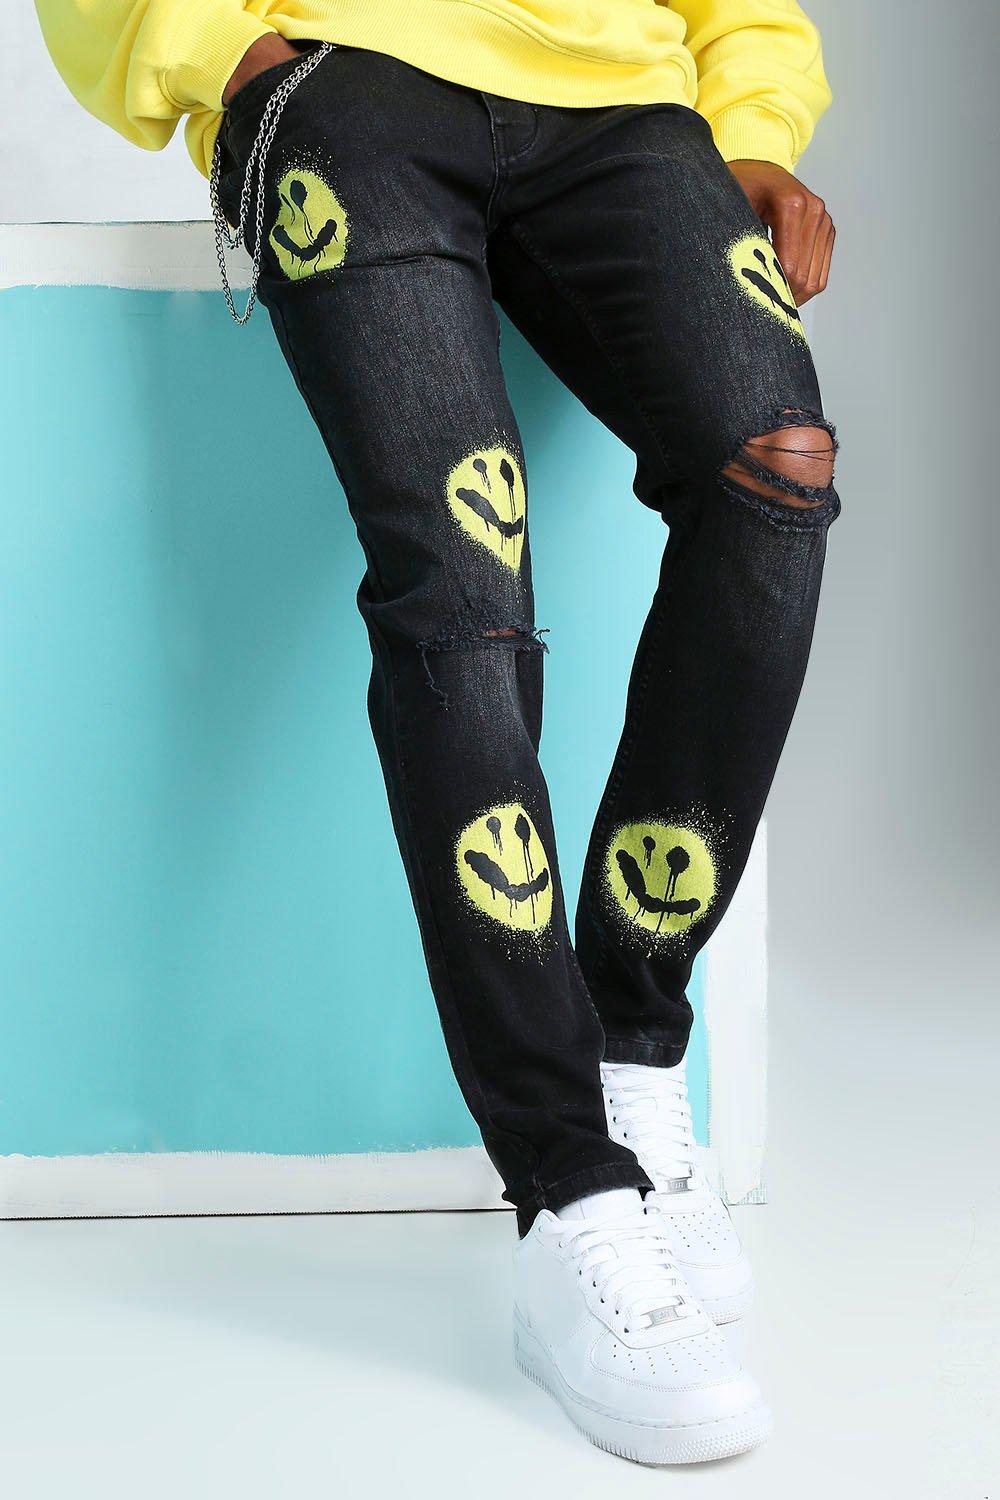 boohoo mens ripped jeans